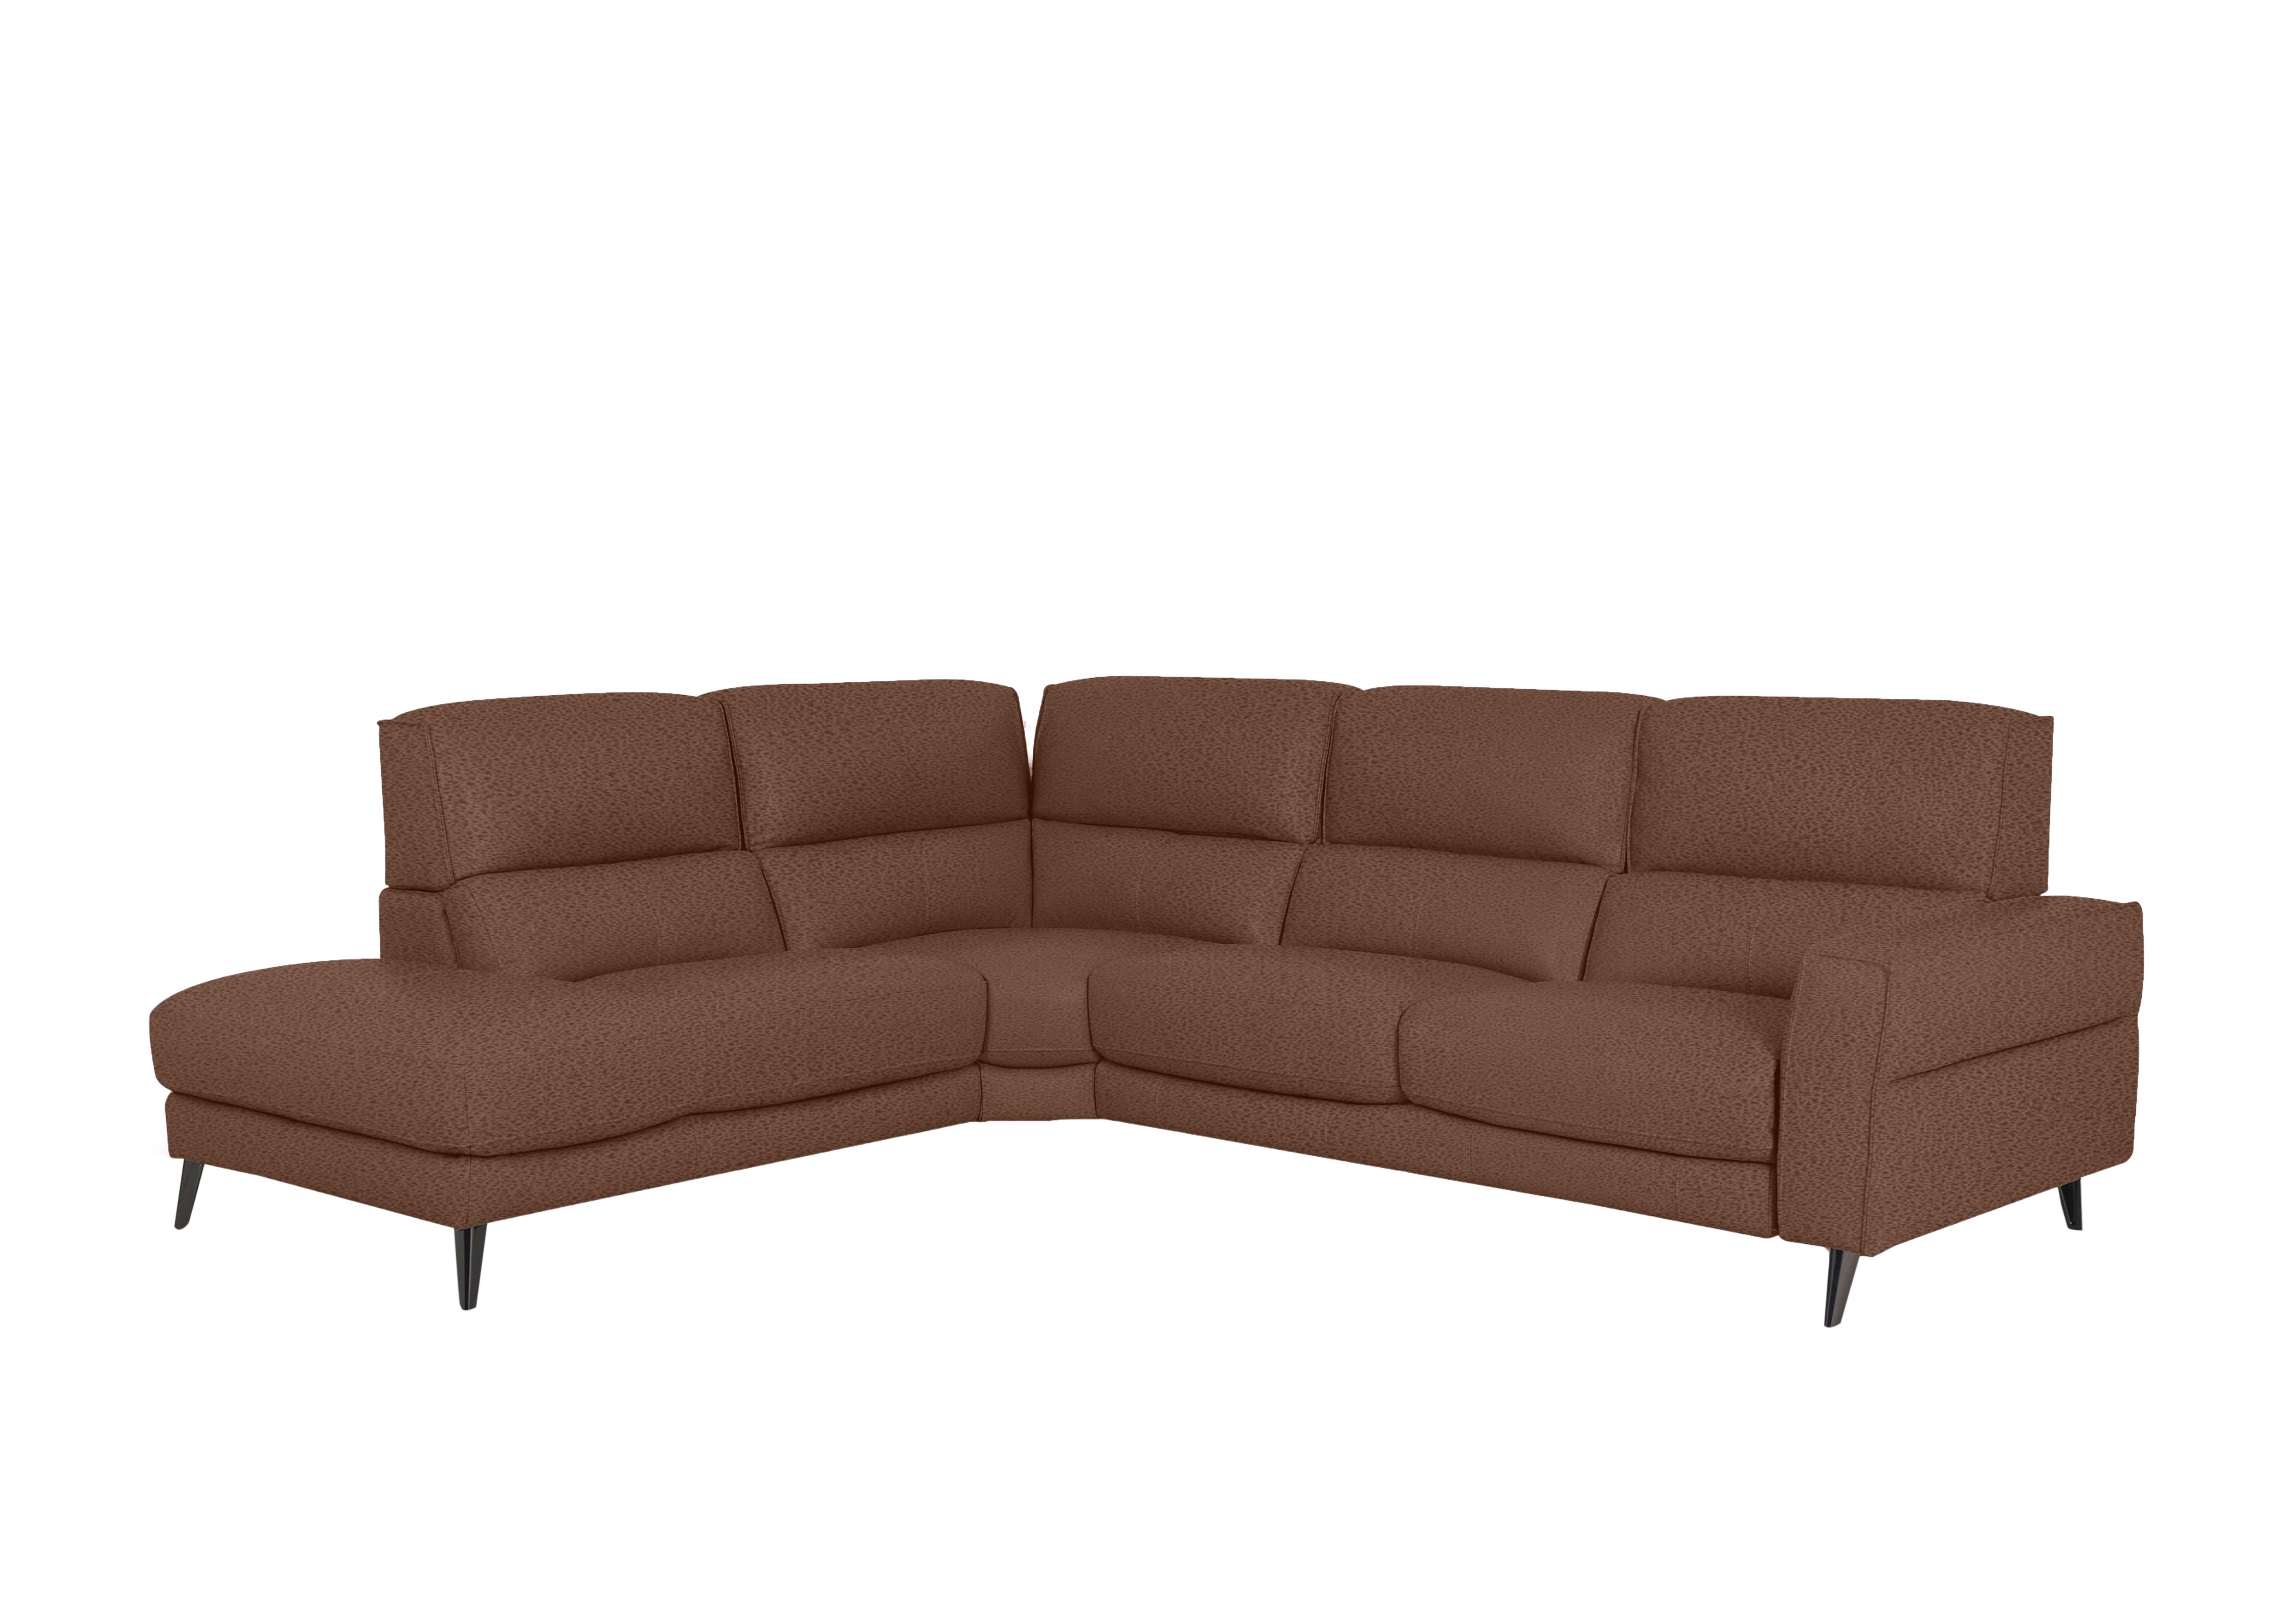 Axel Fabric Chaise End Sofa in Bfa-Blj-R05 Dark Taupe on Furniture Village